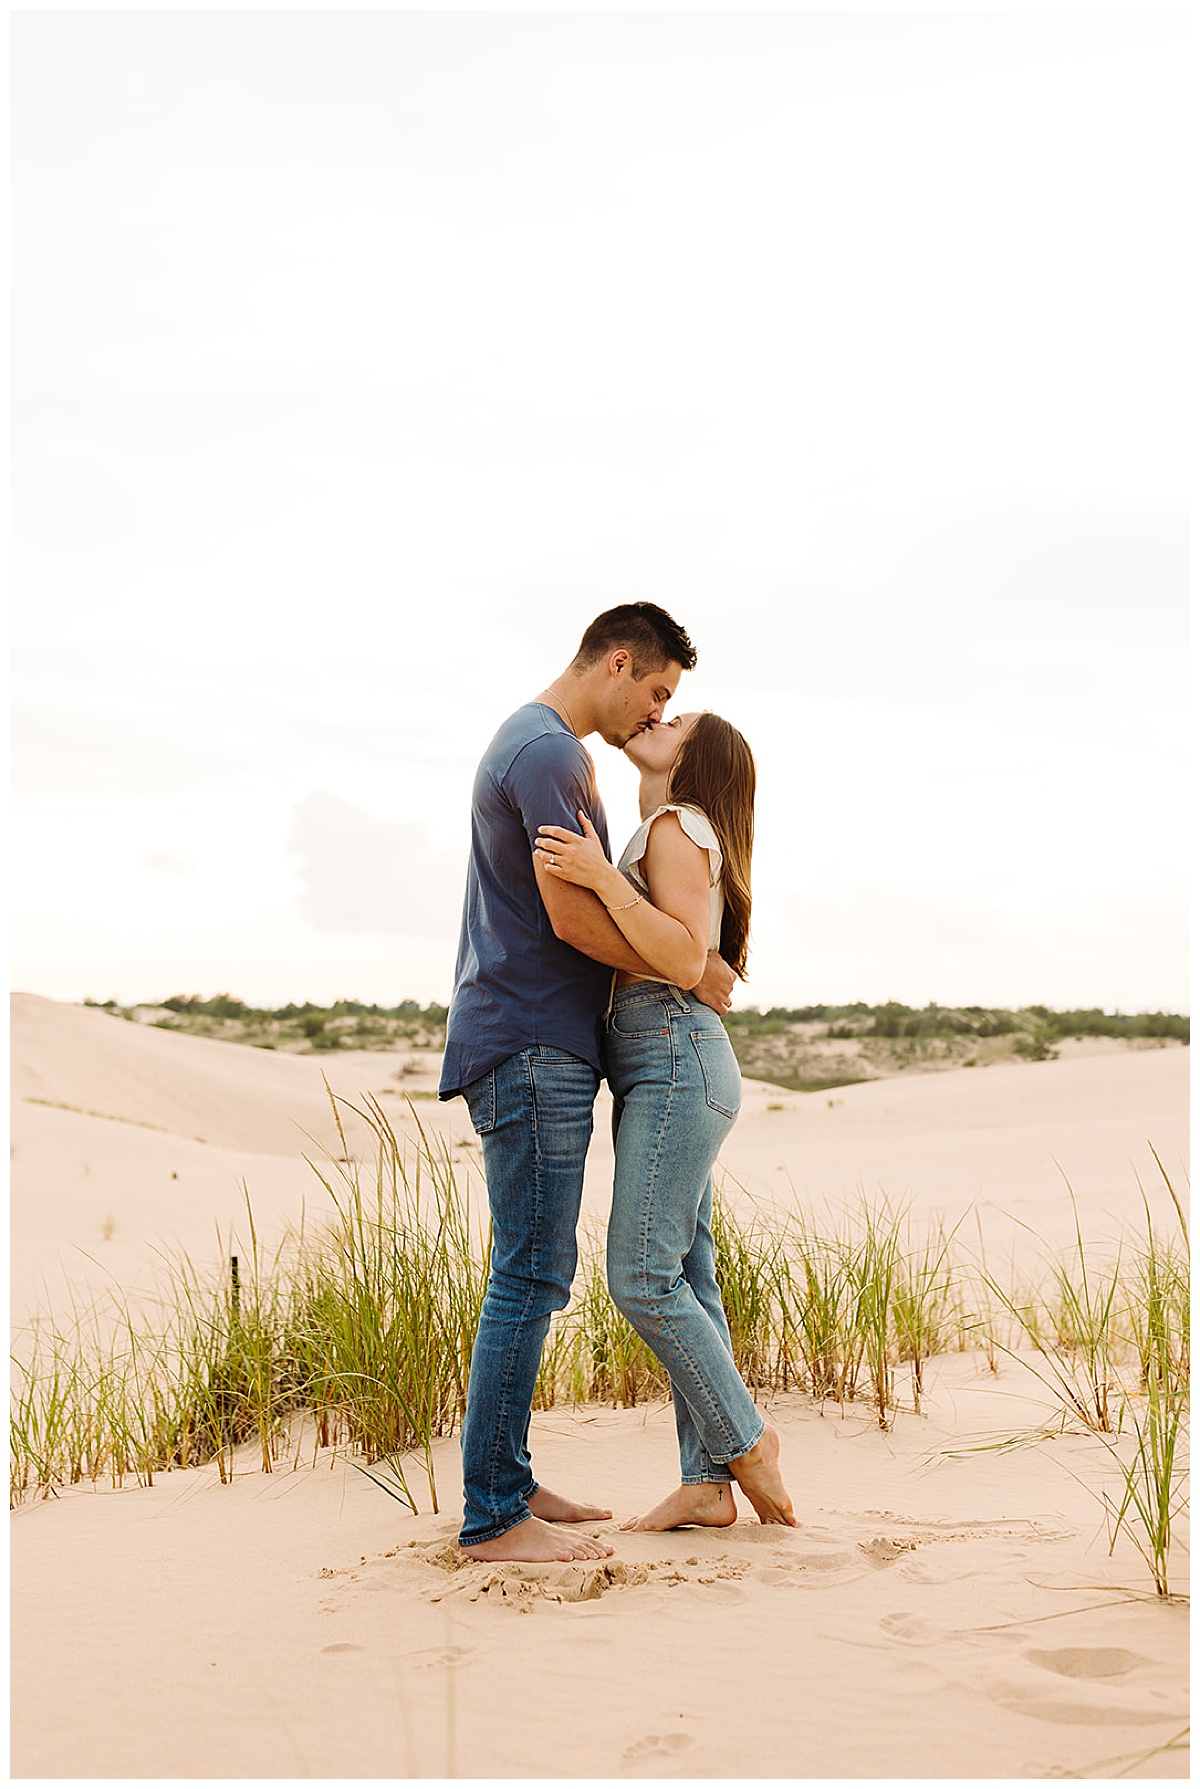 Woman looks up at man with a kiss during Mears, MI Engagement session